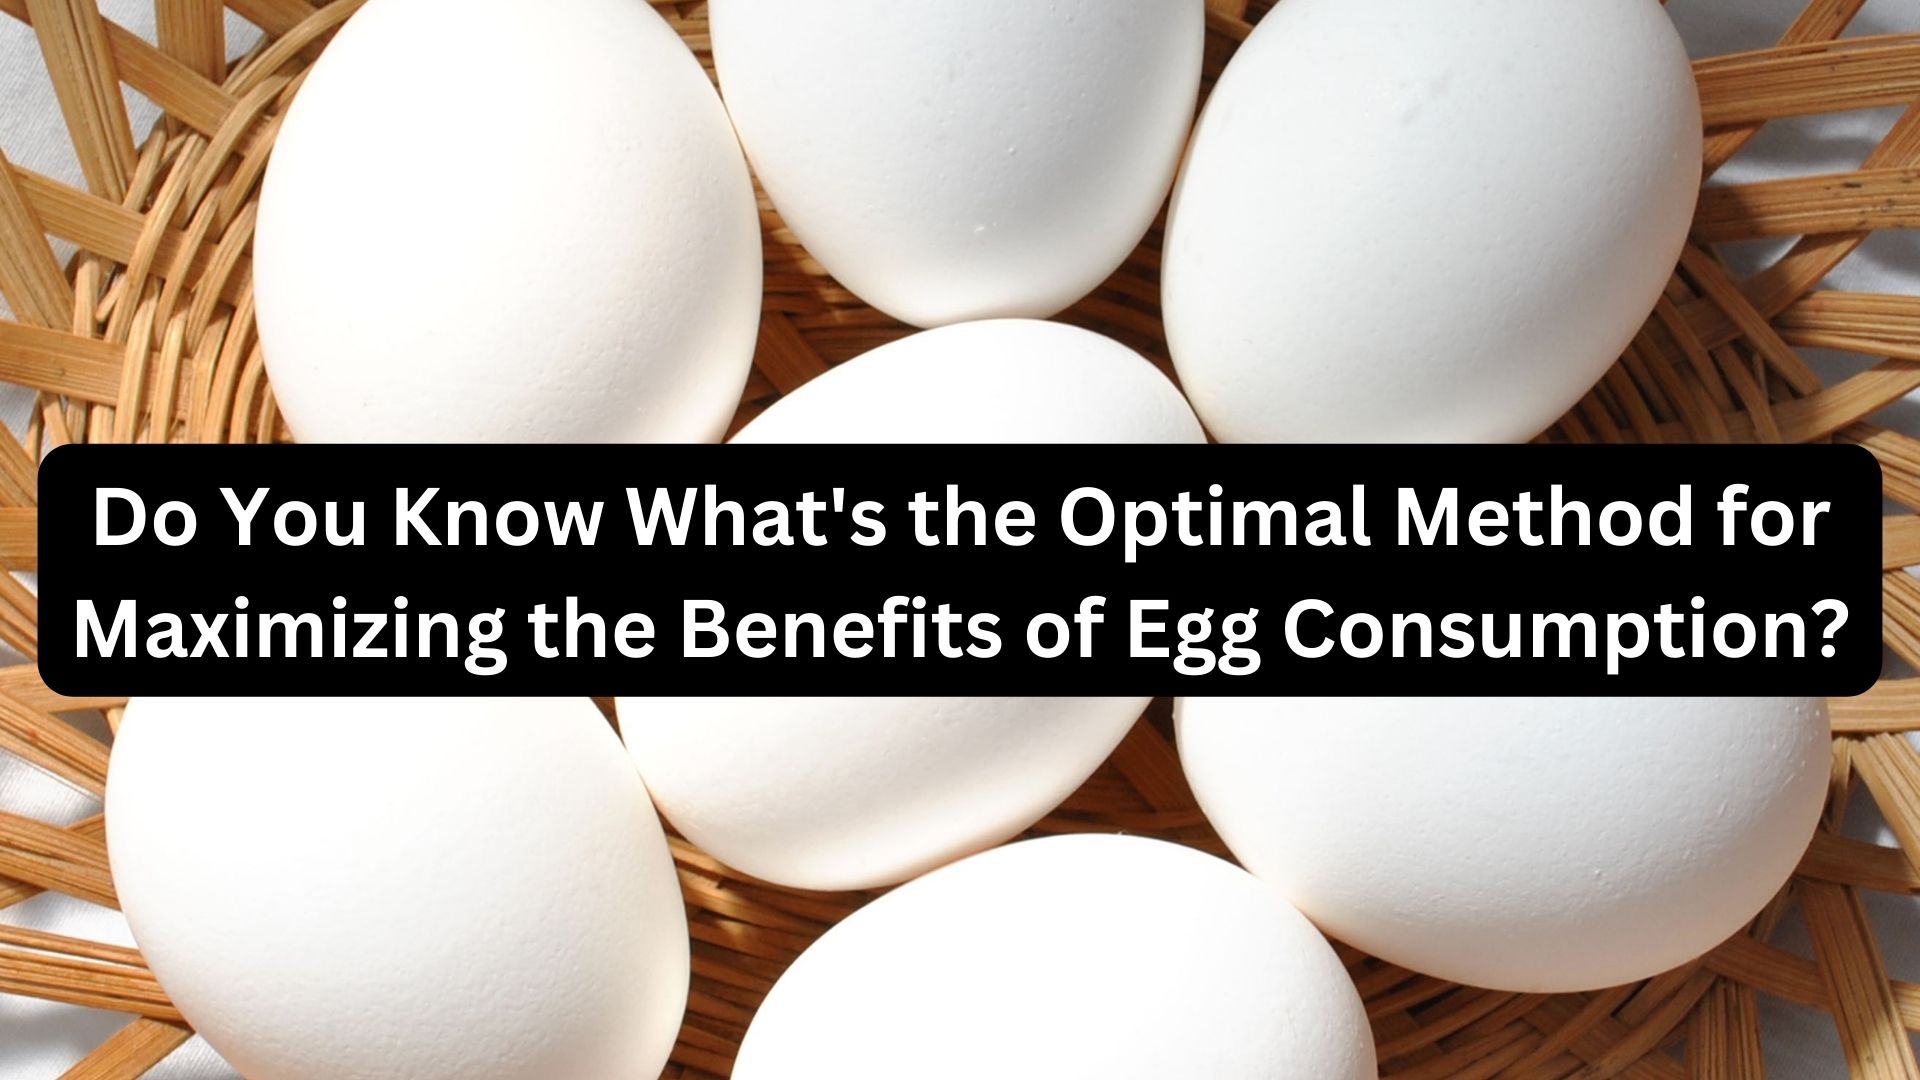 Do You Know What's the Optimal Method for Maximizing the Benefits of Egg Consumption?